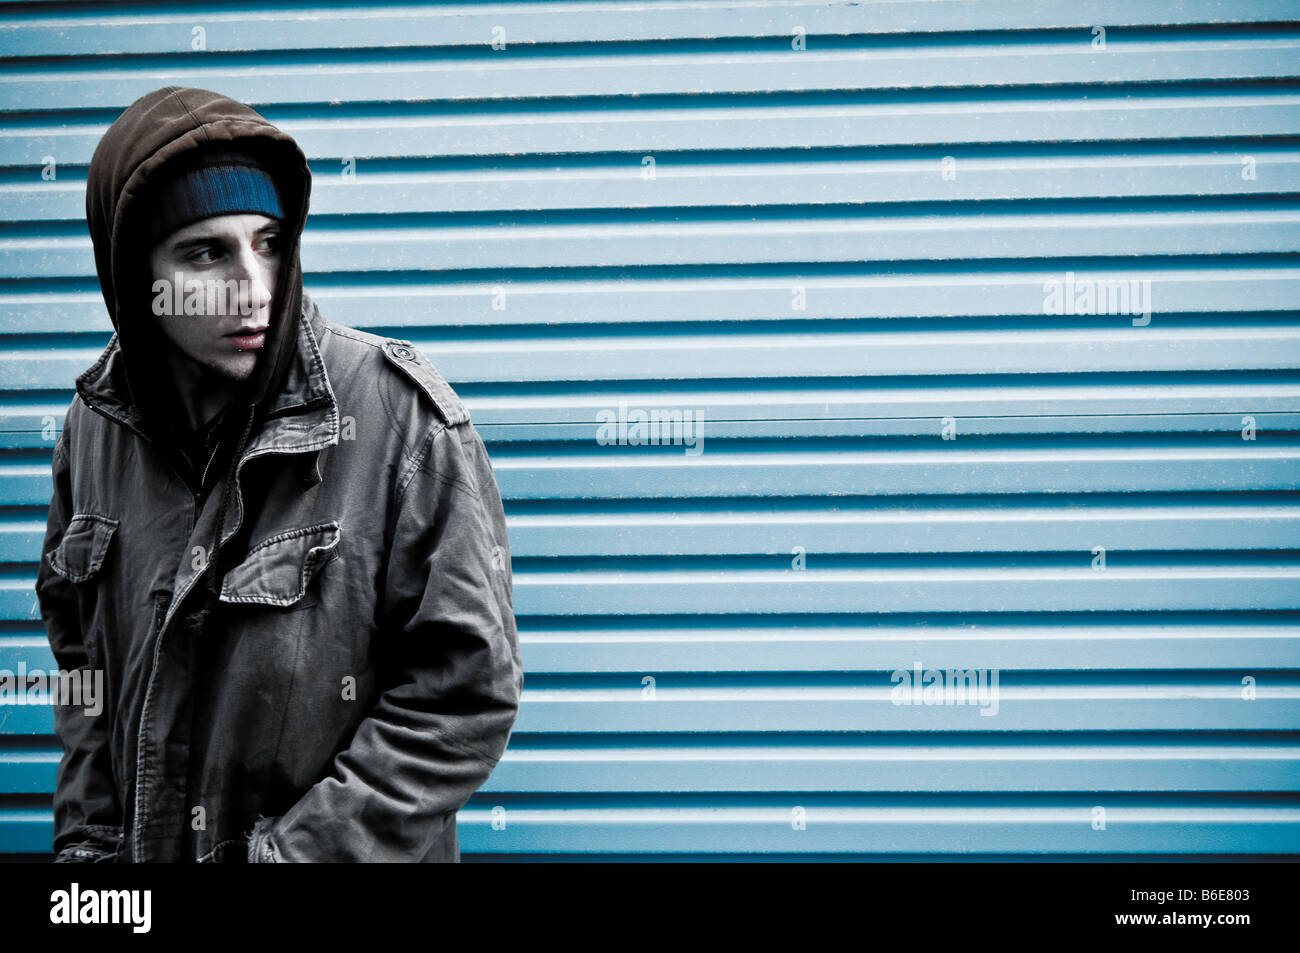 Young man wearing a hooded jacket alone and isolated looking vulnerable and under threat Stock Photo